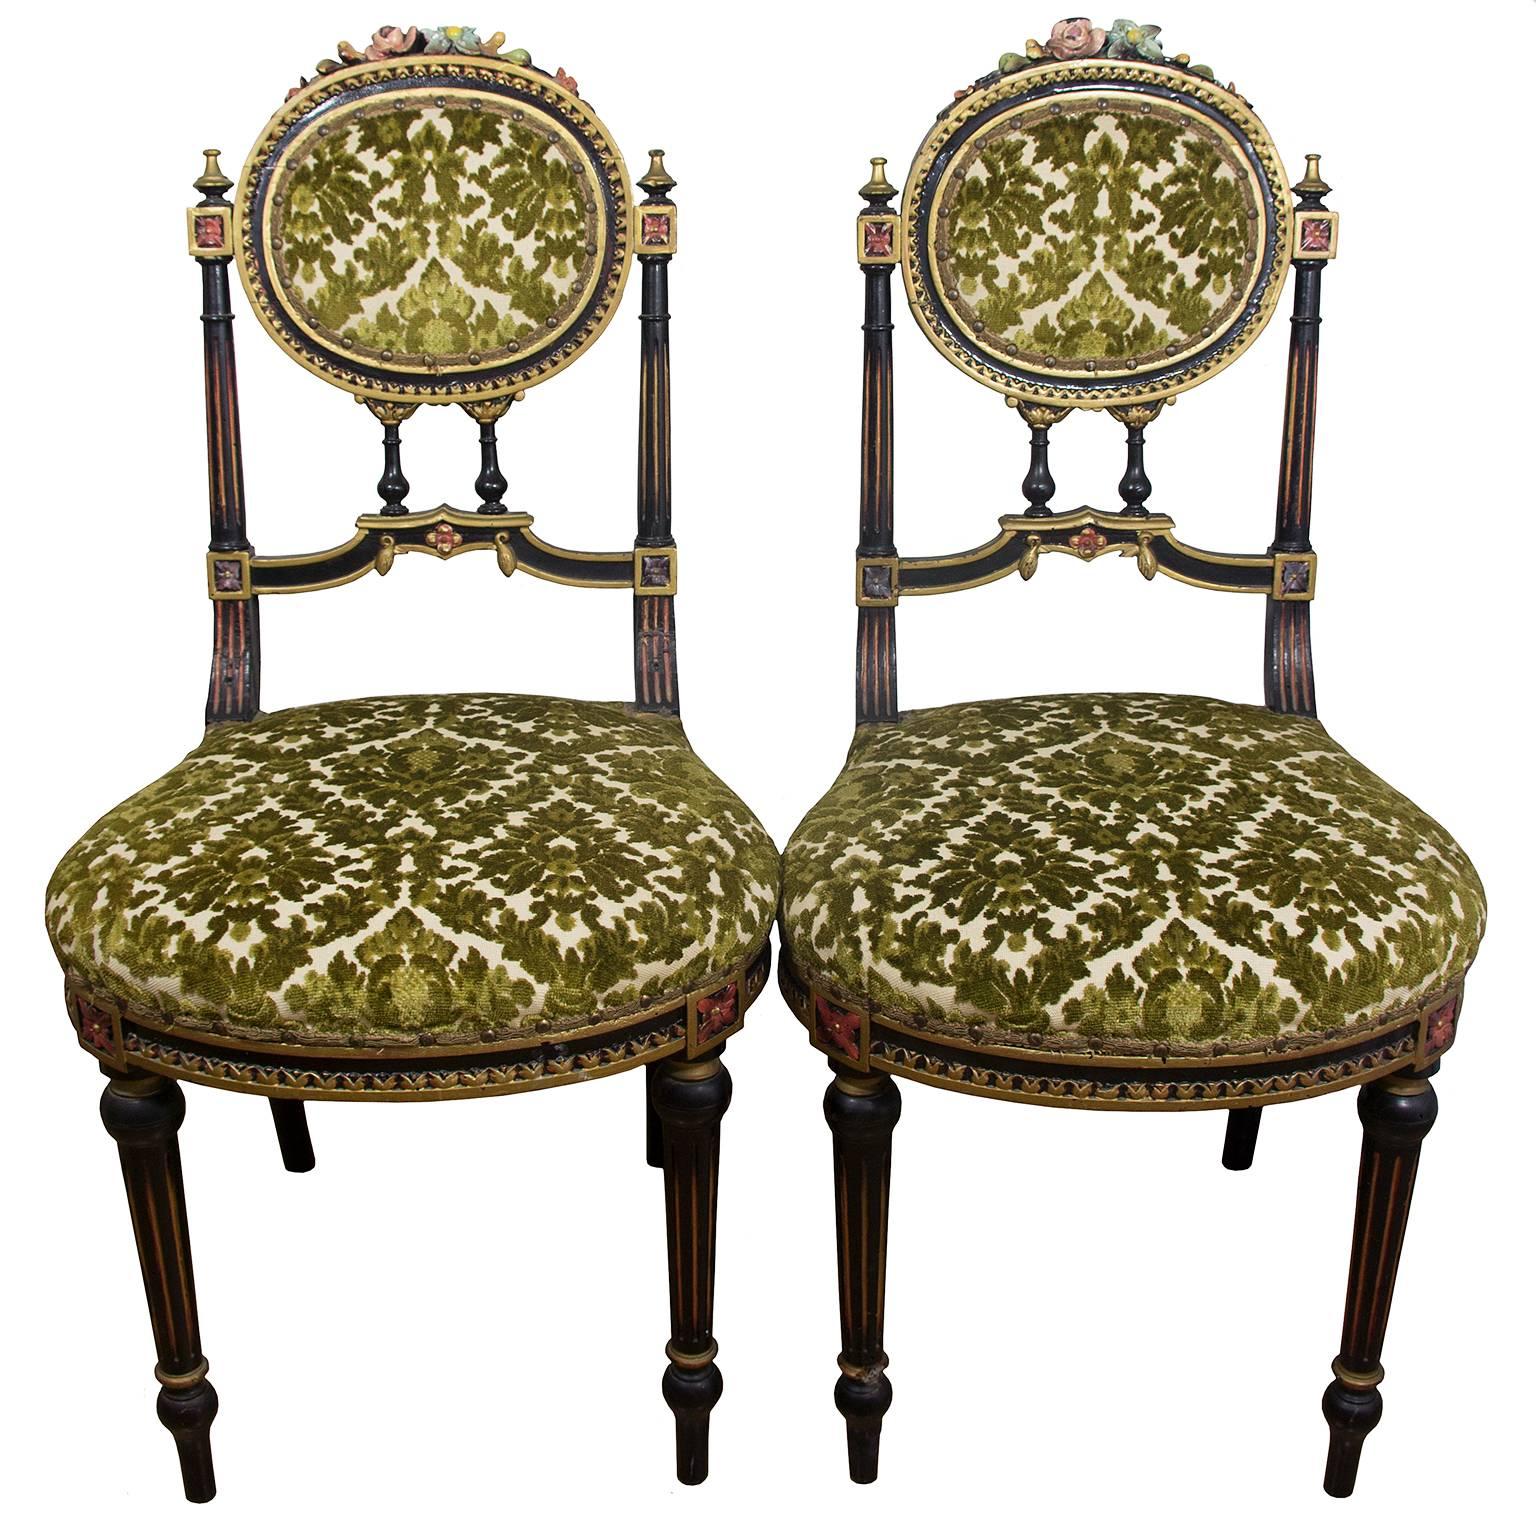 A pair of amazing 19th century painted carved wood and velvet side chairs.
Very good condition condition, old woodworm holes which are typical for antique wood items (please see all photos).

Measurements:
Full height: 88 cm / 35 inches.
Height